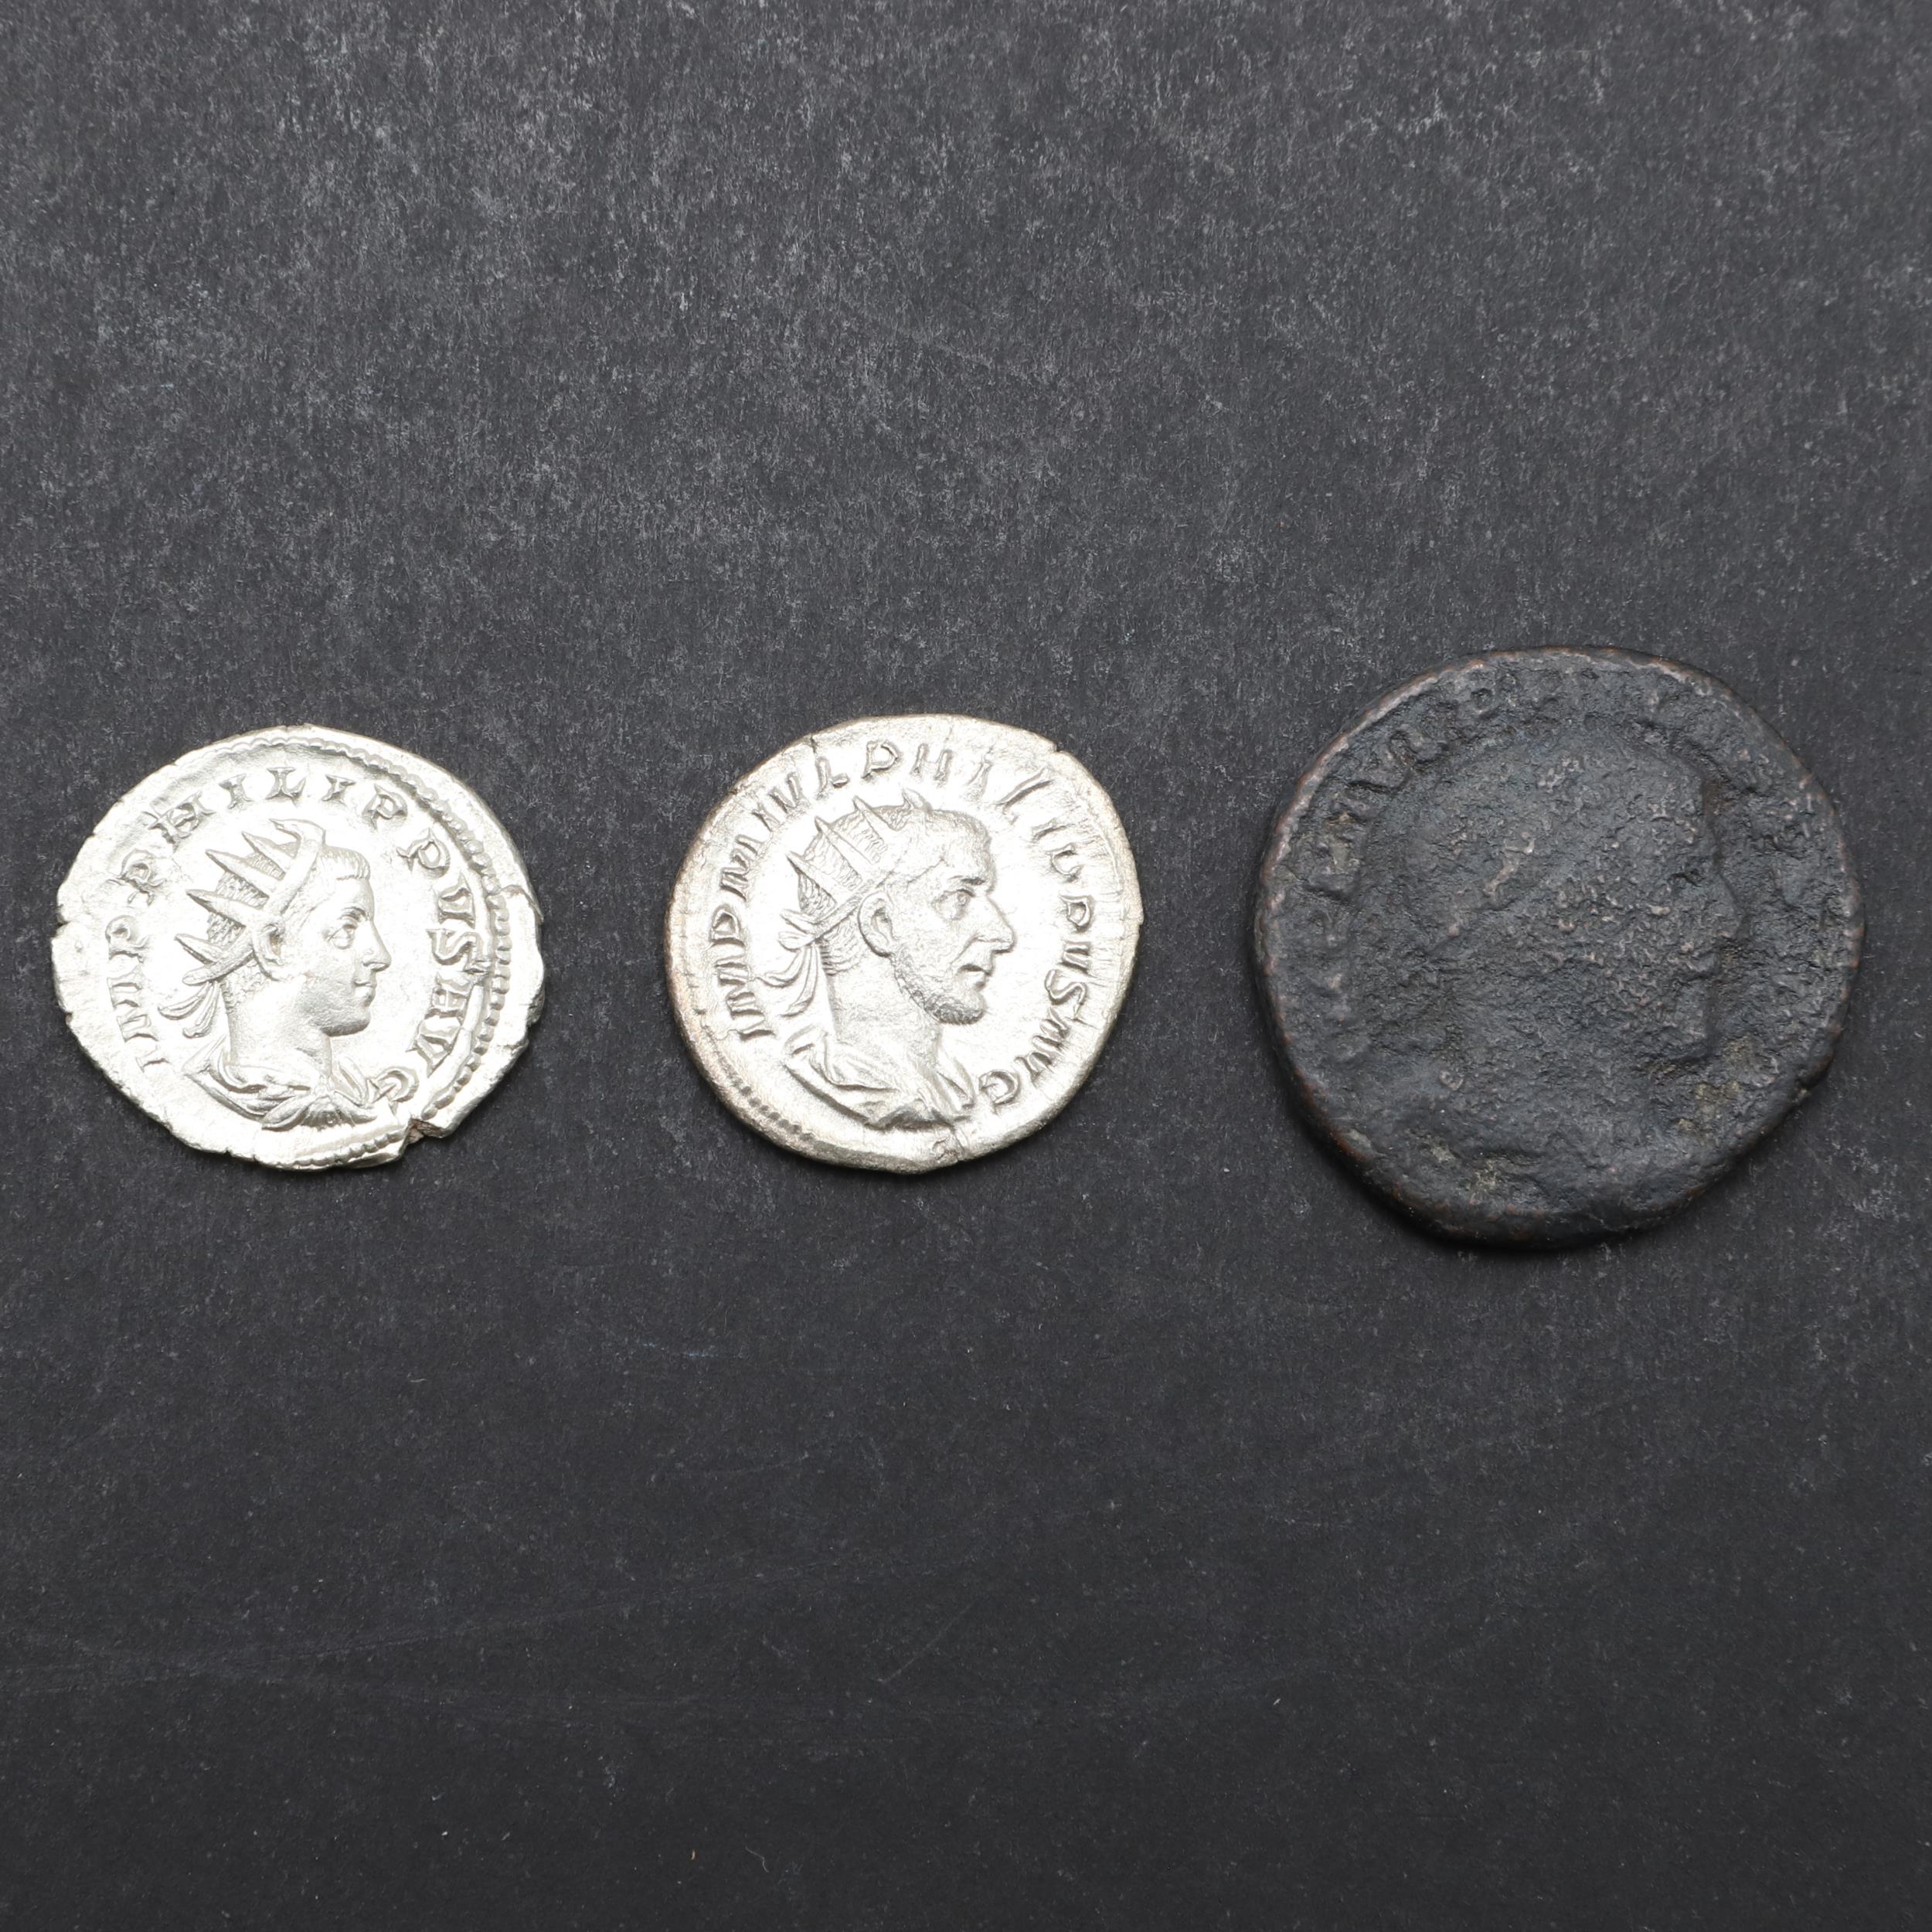 ROMAN IMPERIAL COINAGE: PHILIP I 244-249 AND PHILIP II 247 - 249 A.D.